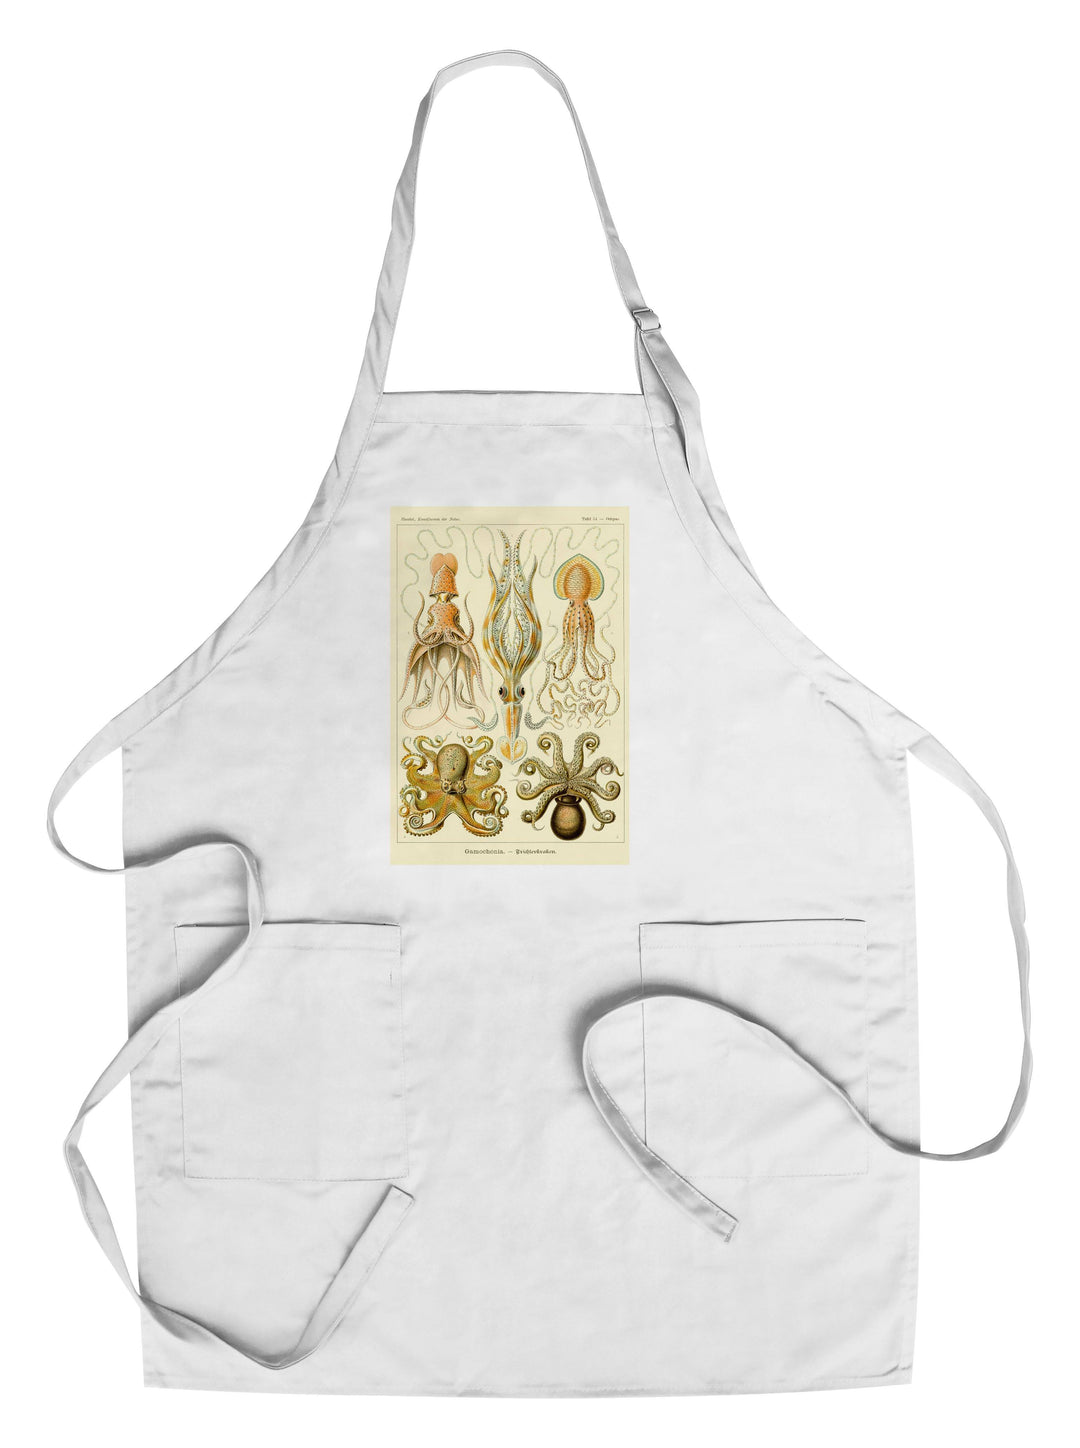 Art Forms of Nature, Gamochonia (Octopuses & Squids), Ernst Haeckel Artwork, Towels and Aprons Kitchen Lantern Press 